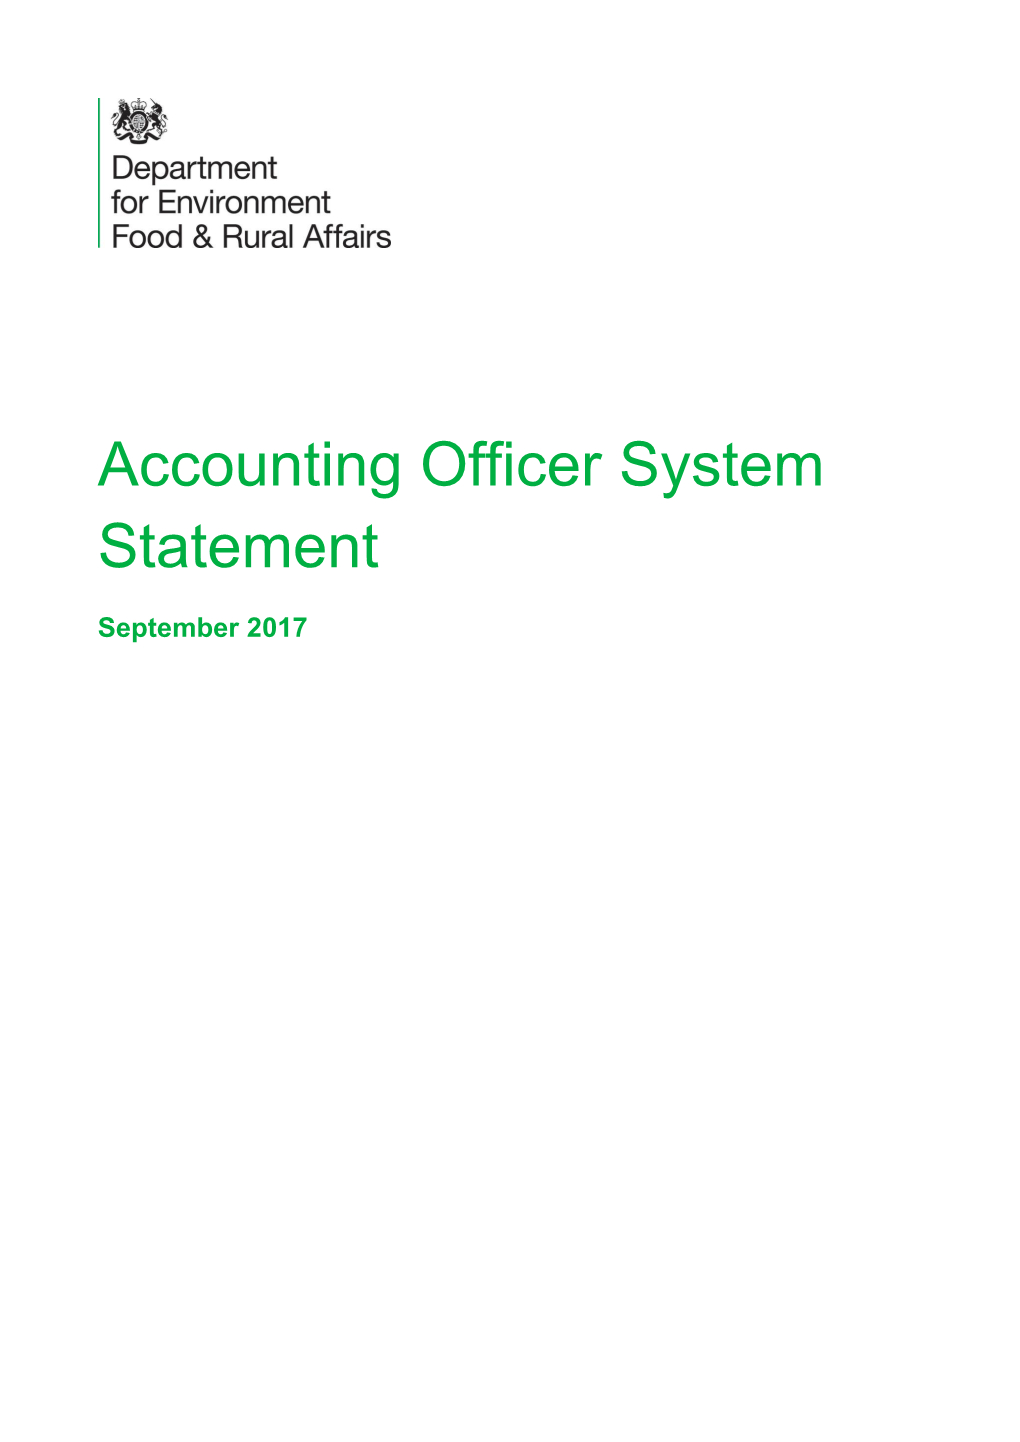 Defra Accounting Officer System Statement